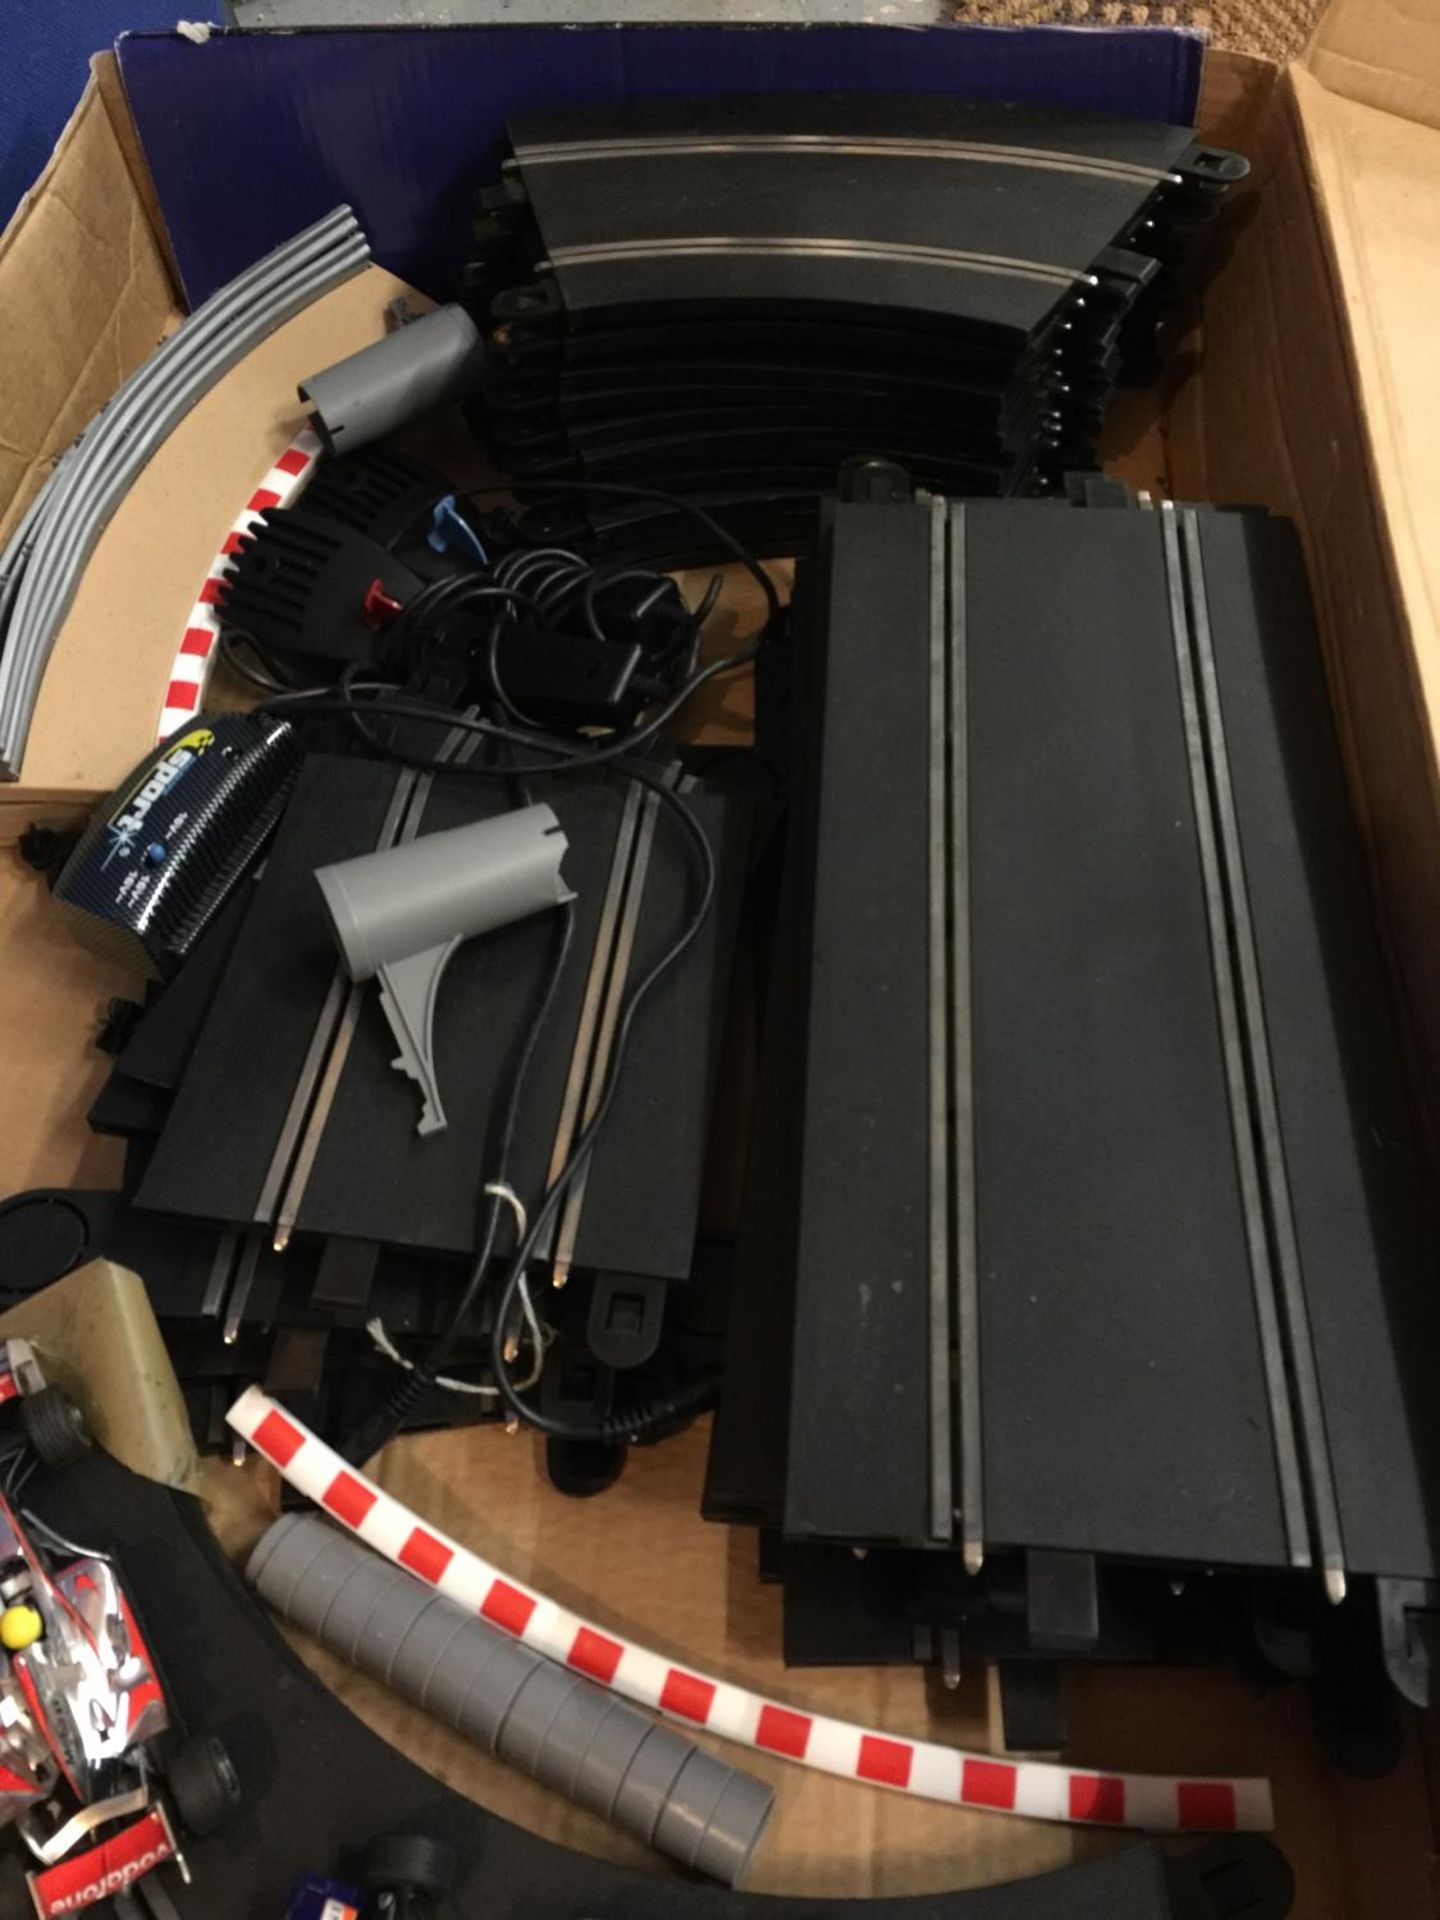 A F1 SCALEXTRIC SET INCLUDING TRACK, KERBING BARRIERS, CONTROLLERS ETC. BOTH CARS ARE A/F FOR SPARES - Image 4 of 5